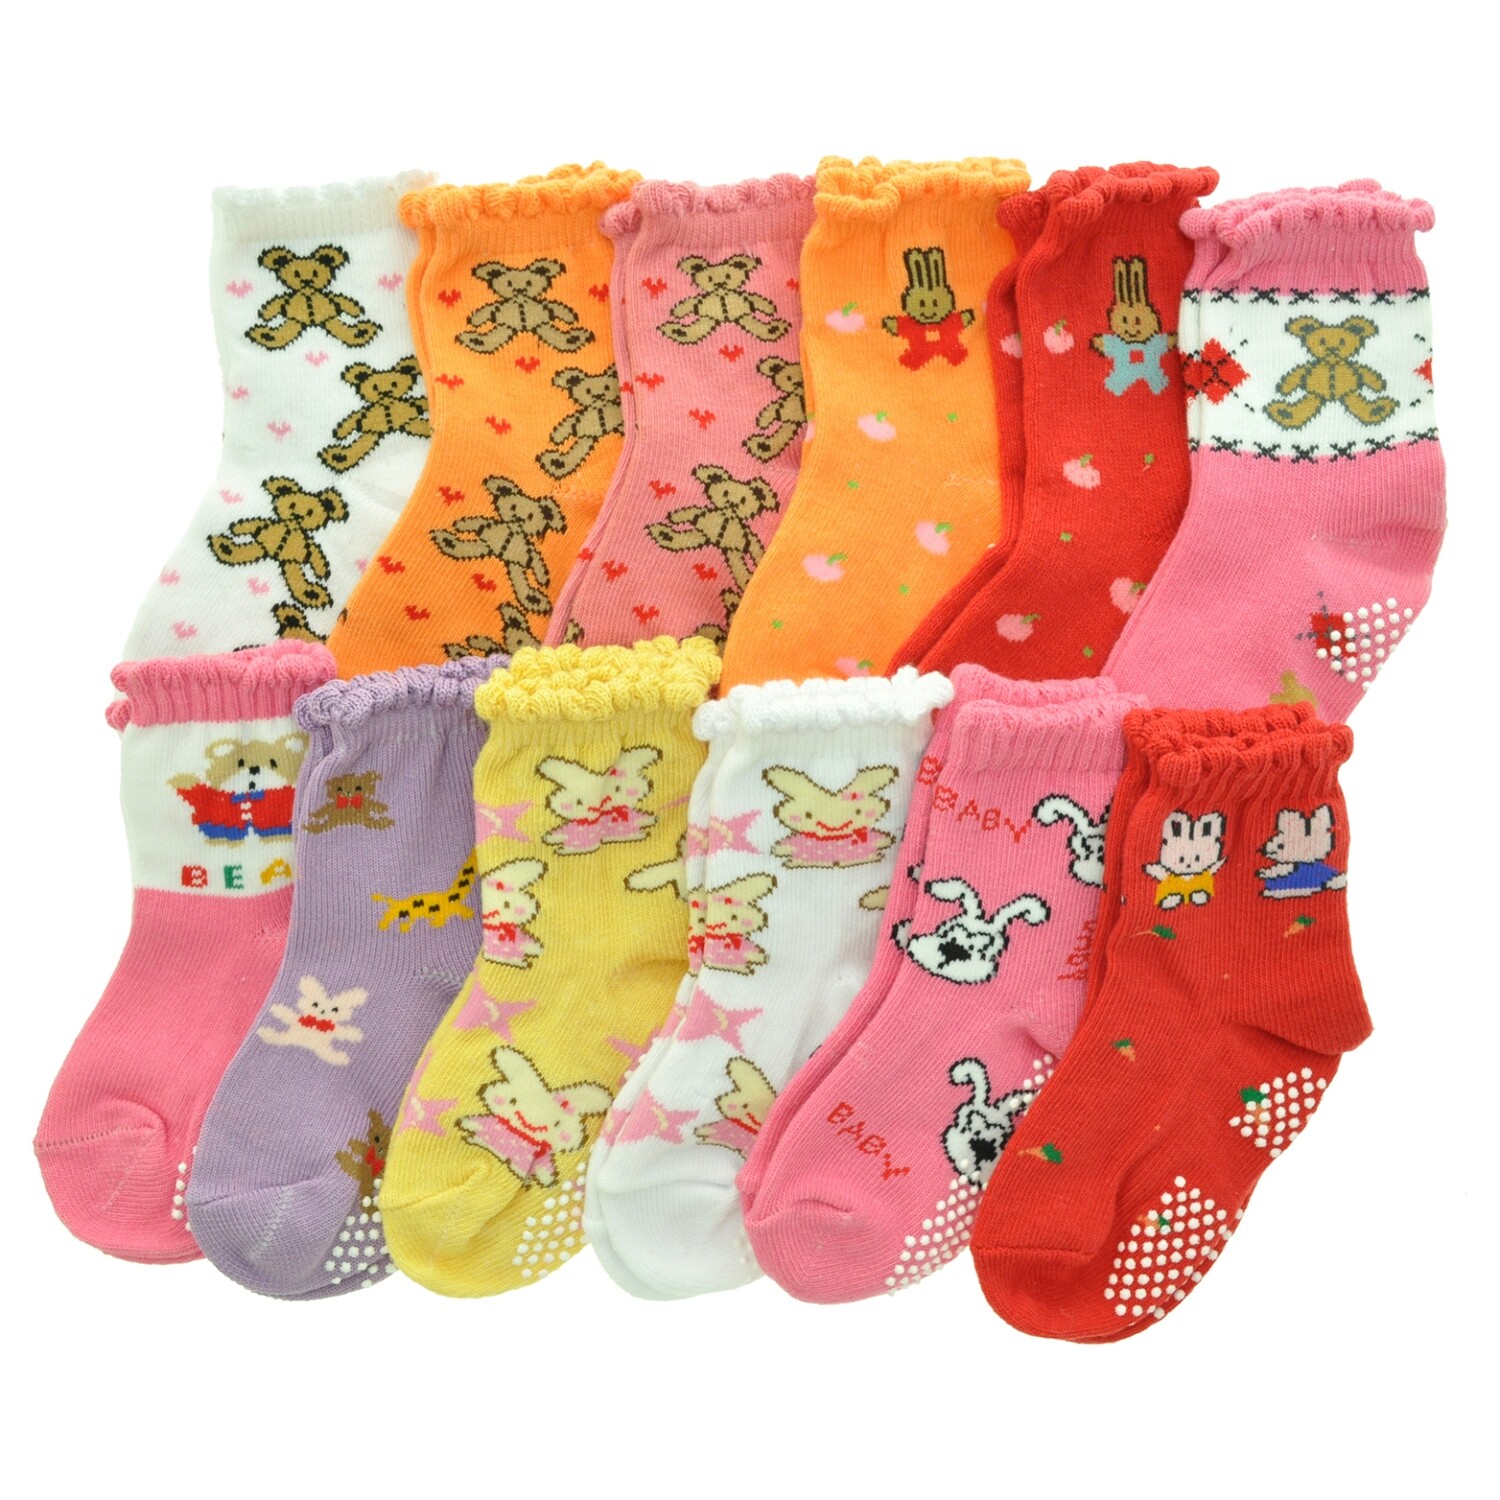 . Case of [120] Angelina Baby Girls' Cotton Blend Socks - Assorted Colors & Designs, 12-24M .